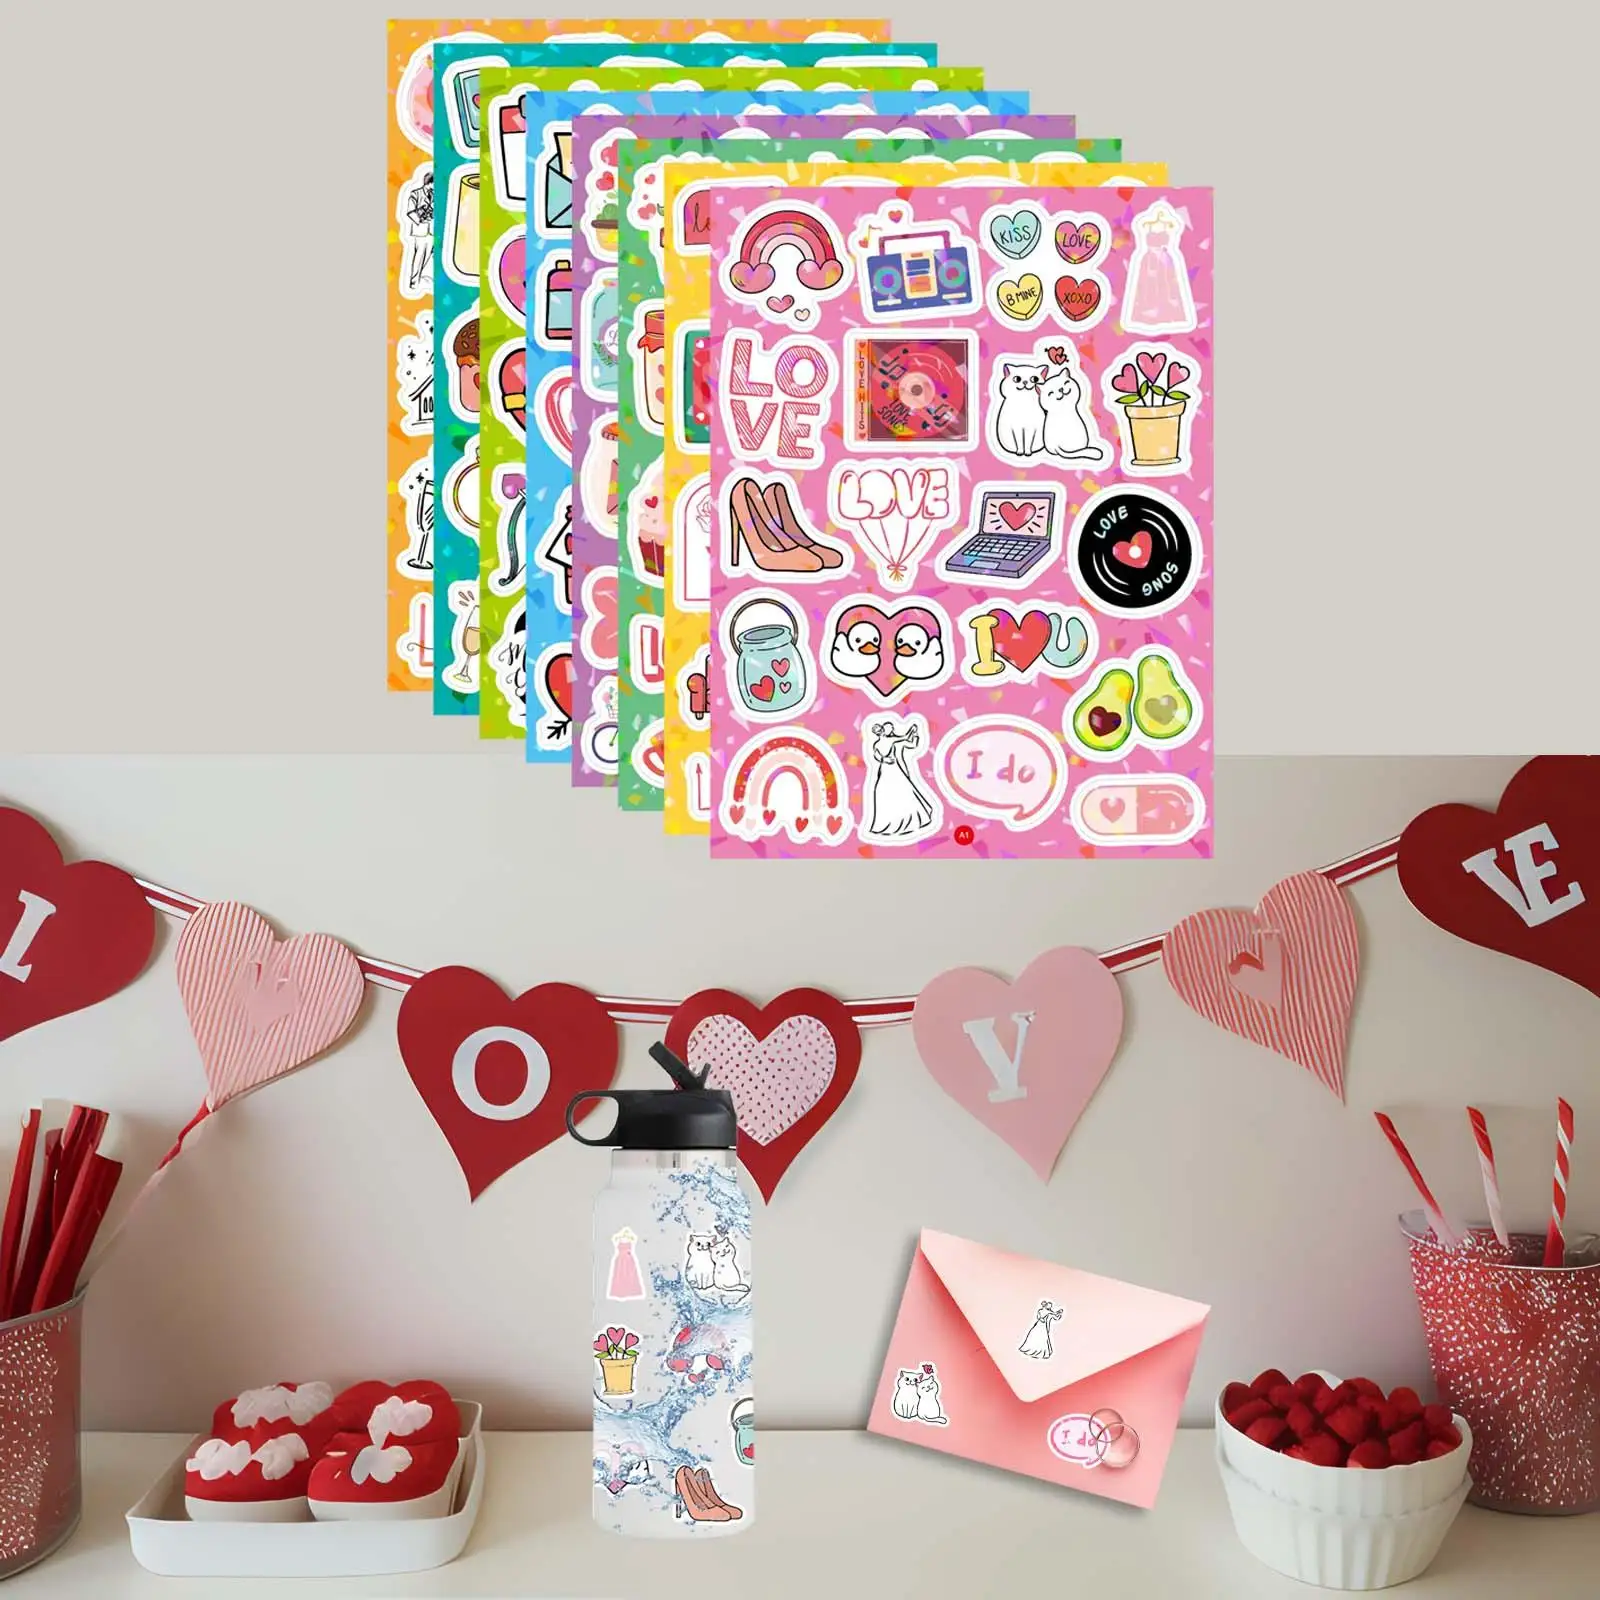 8x Valentine`s Day Stickers Party Supply Decorative Vinyl Waterproof Stickers for Proposals Scrapbooks Anniversary Letters Male